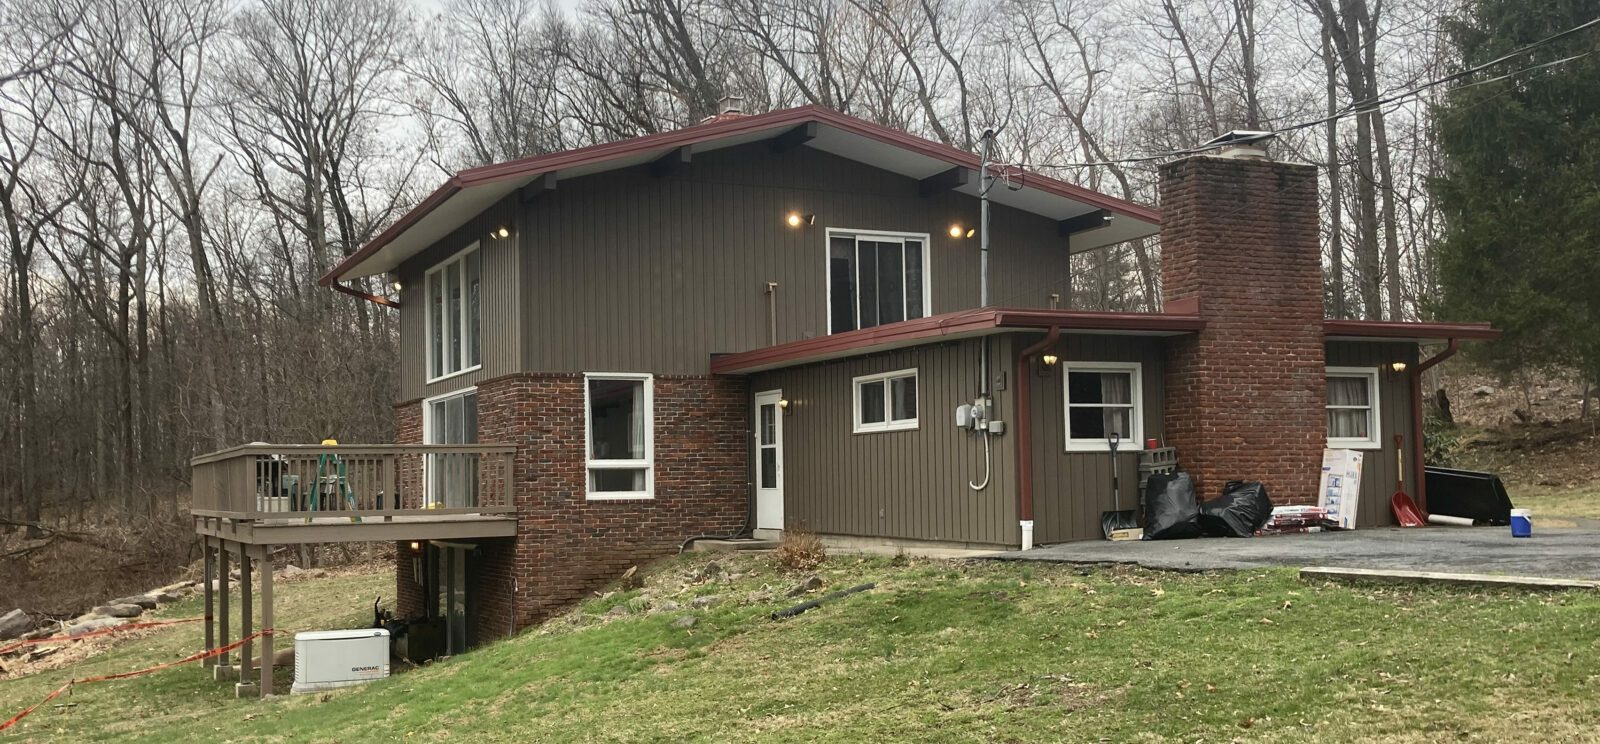 ABS Metal Roof, Color: Colonial Red, Red Seamless Gutters White Vinyl Soffit, Red Fascia, EPDM Rubber Roof on lower section, Mohnton, PA, Berks Co. PA, Installed April 2022